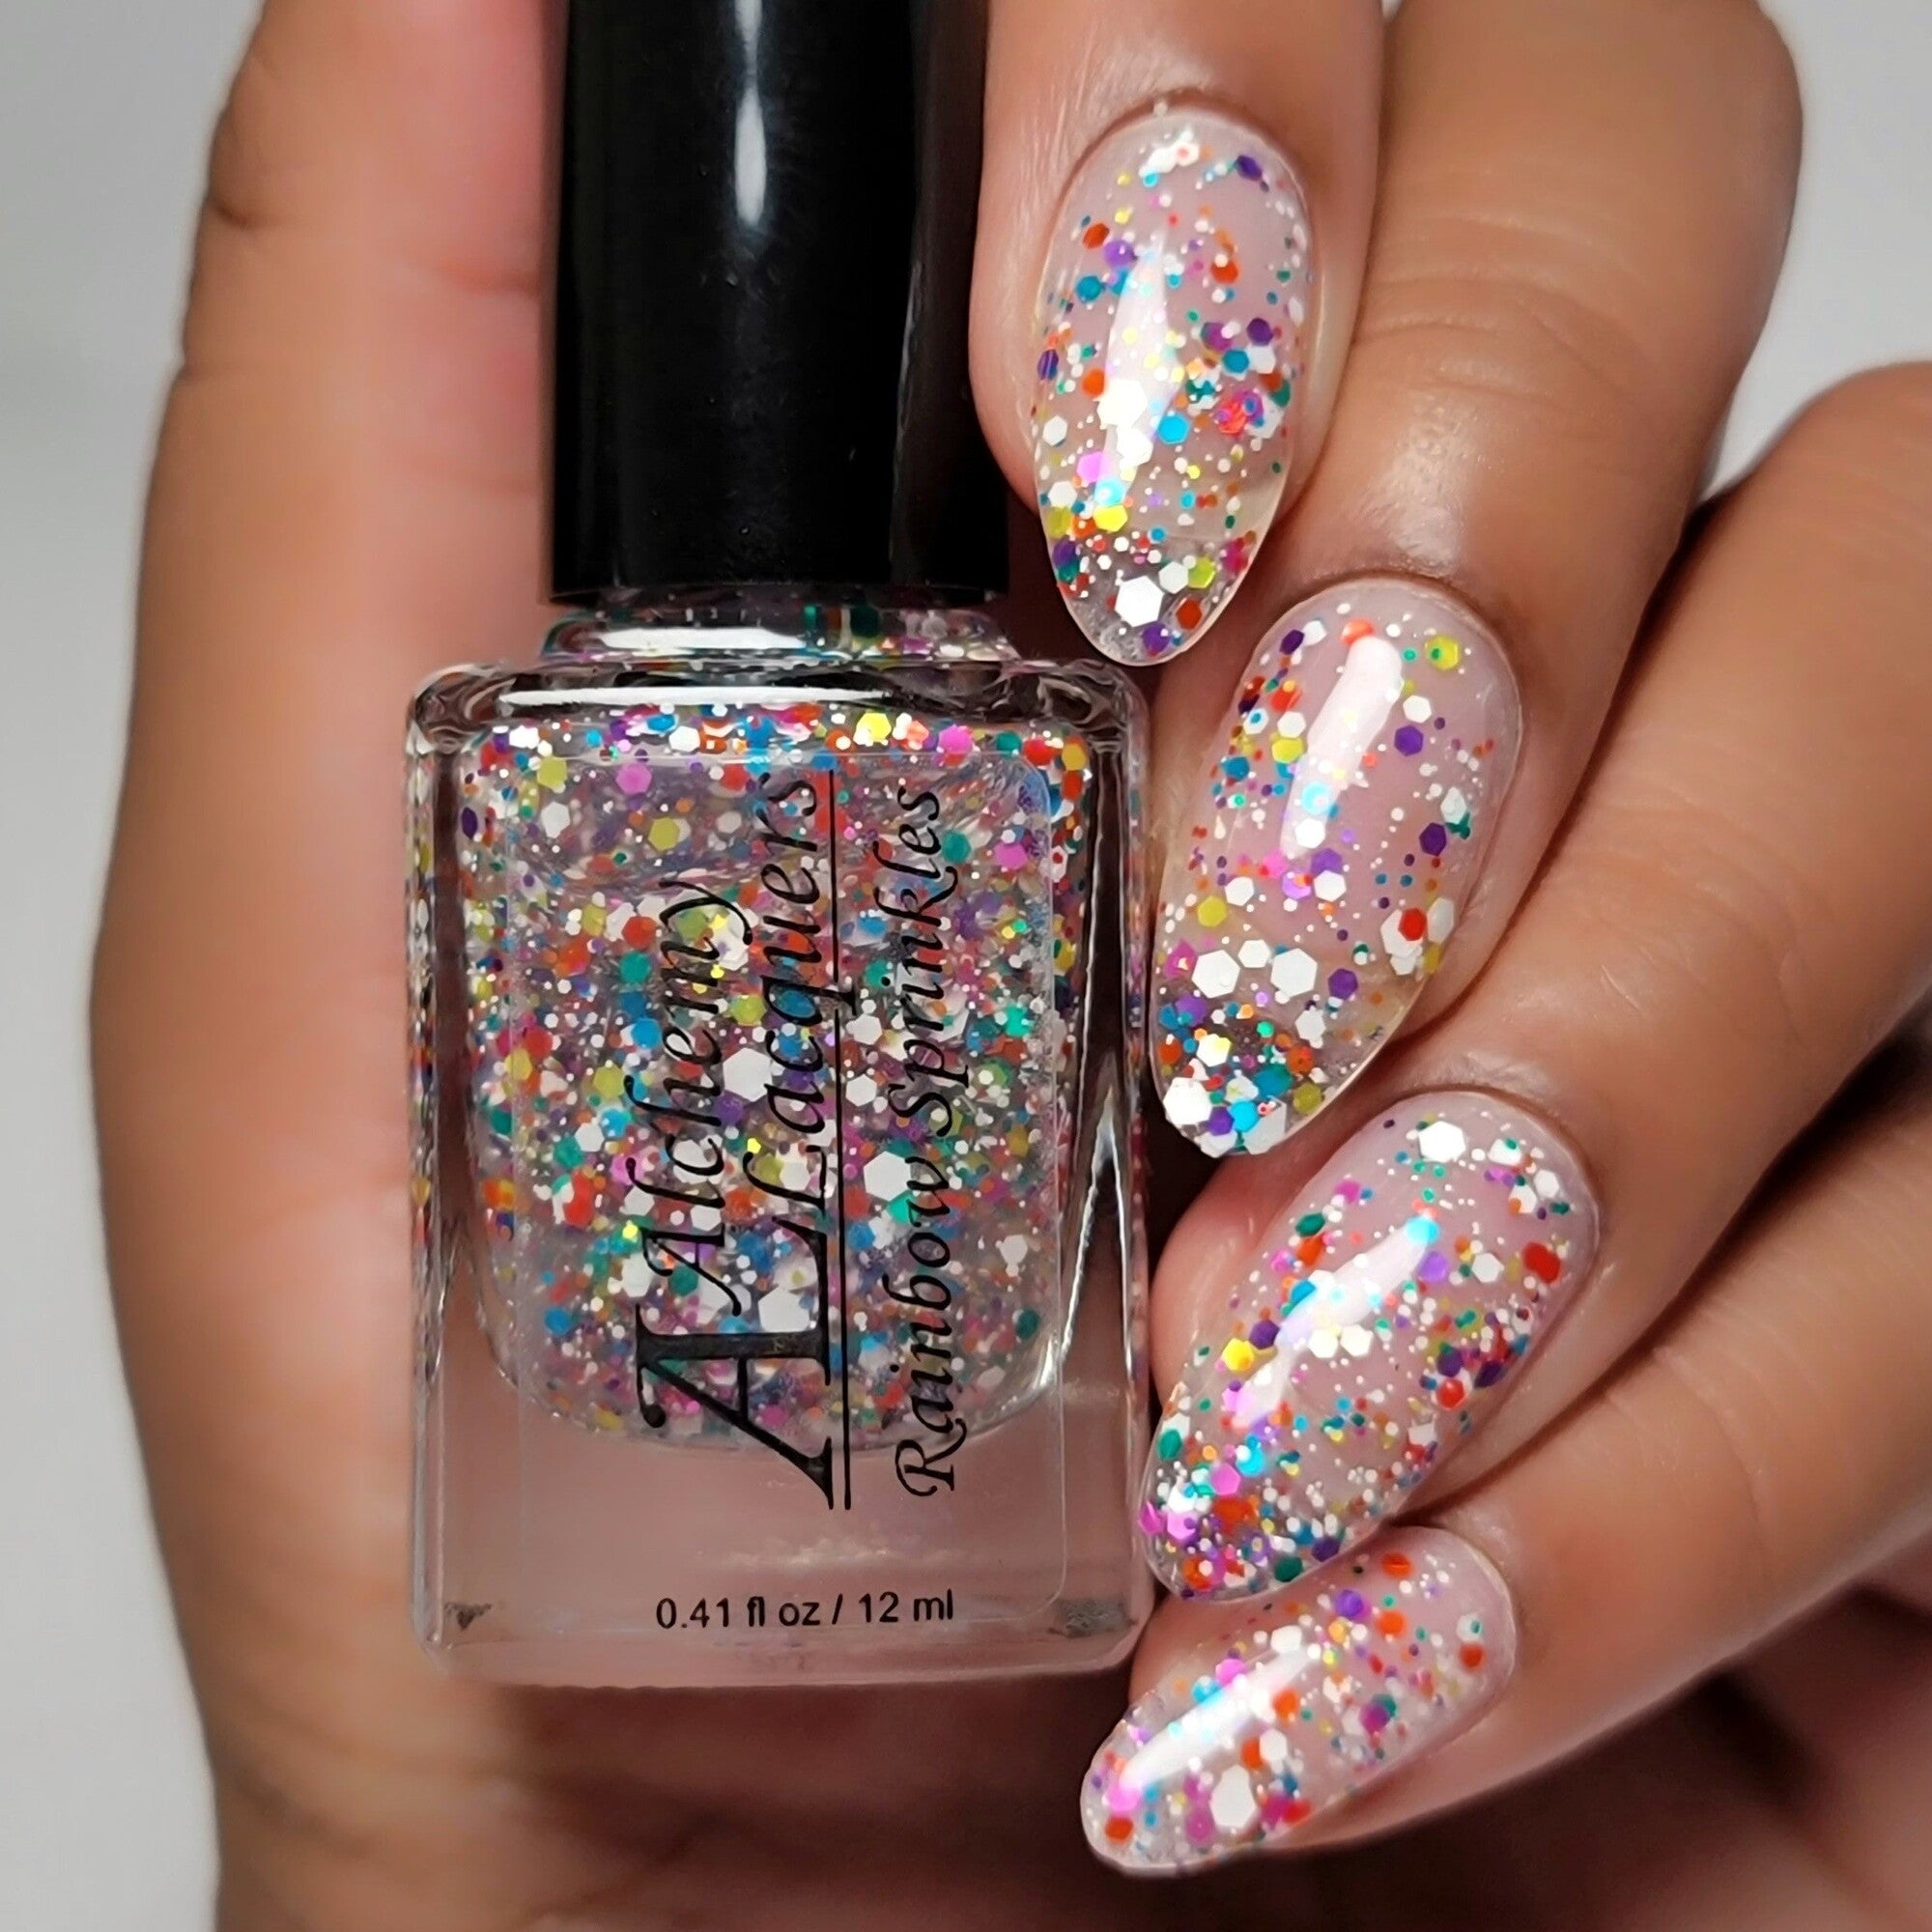 Alchemy Lacquers Rainbow Sprinkles (Glitter Topper) Nail Polish